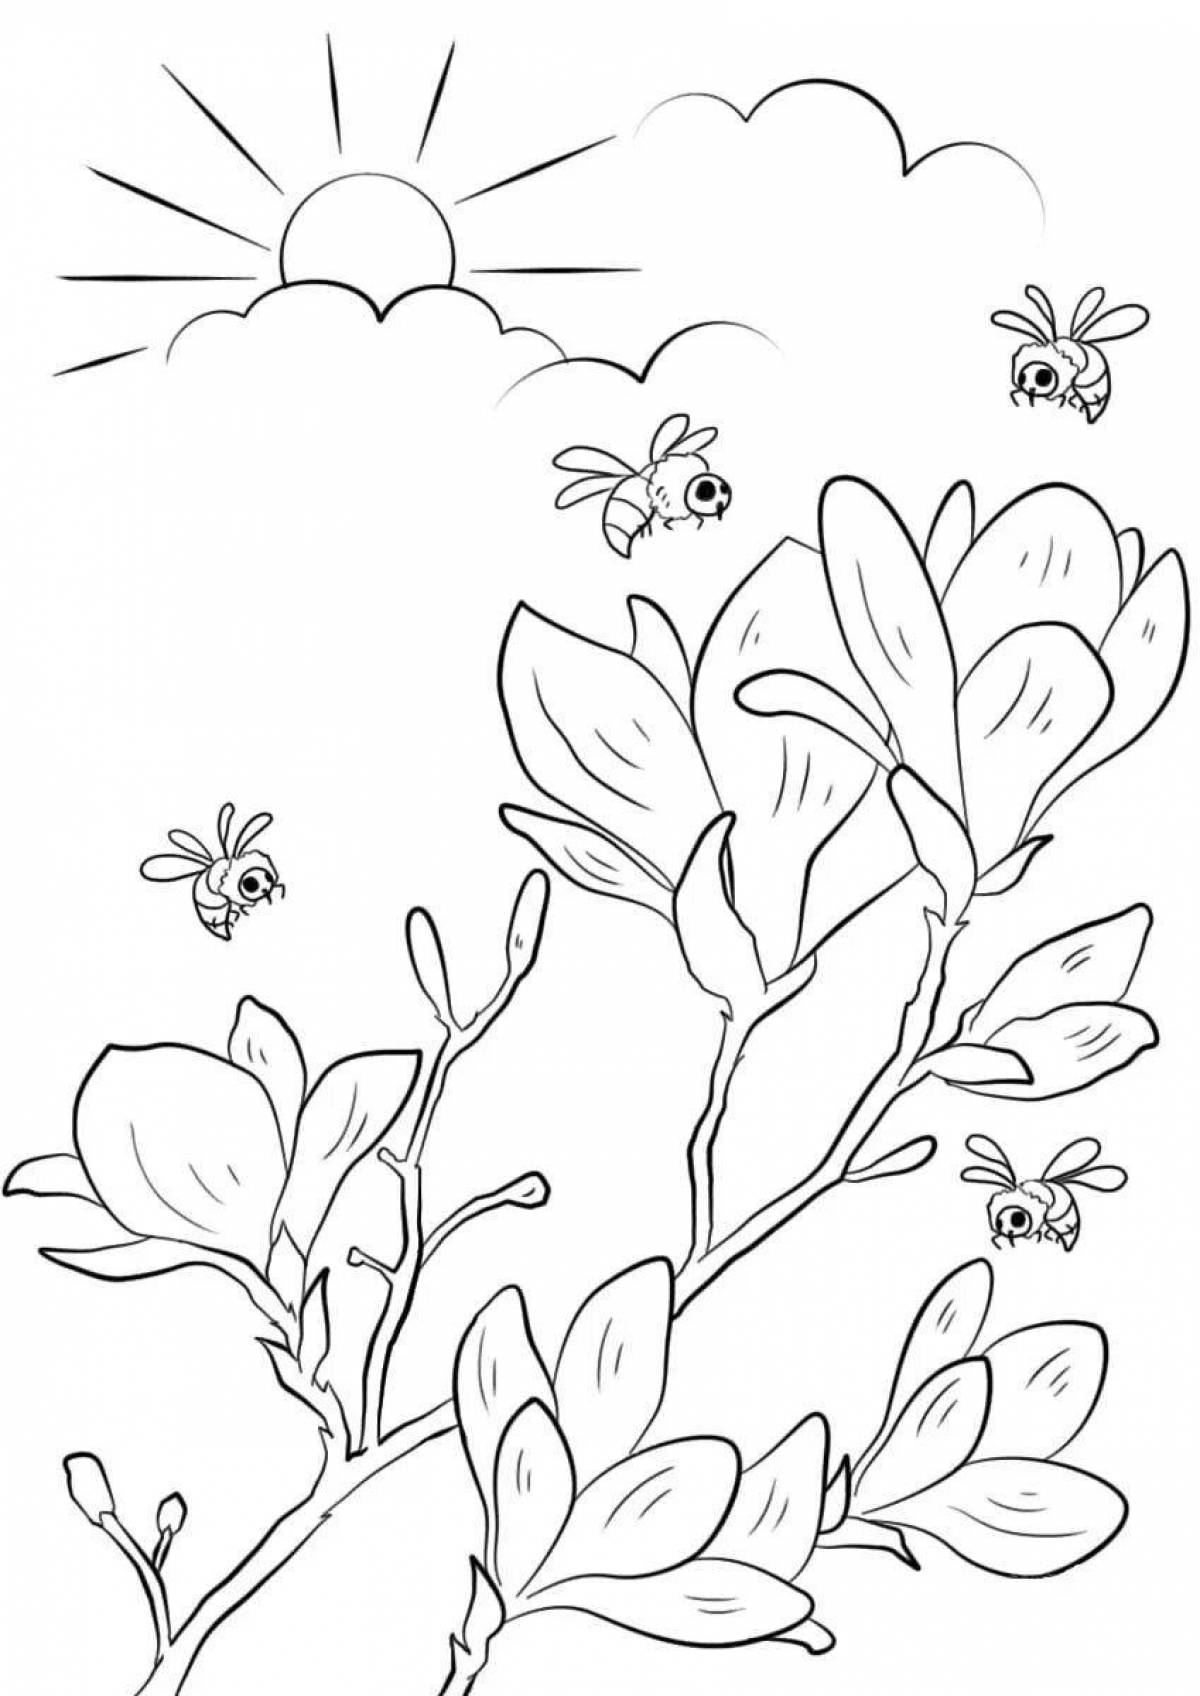 Playful spring flowers coloring book